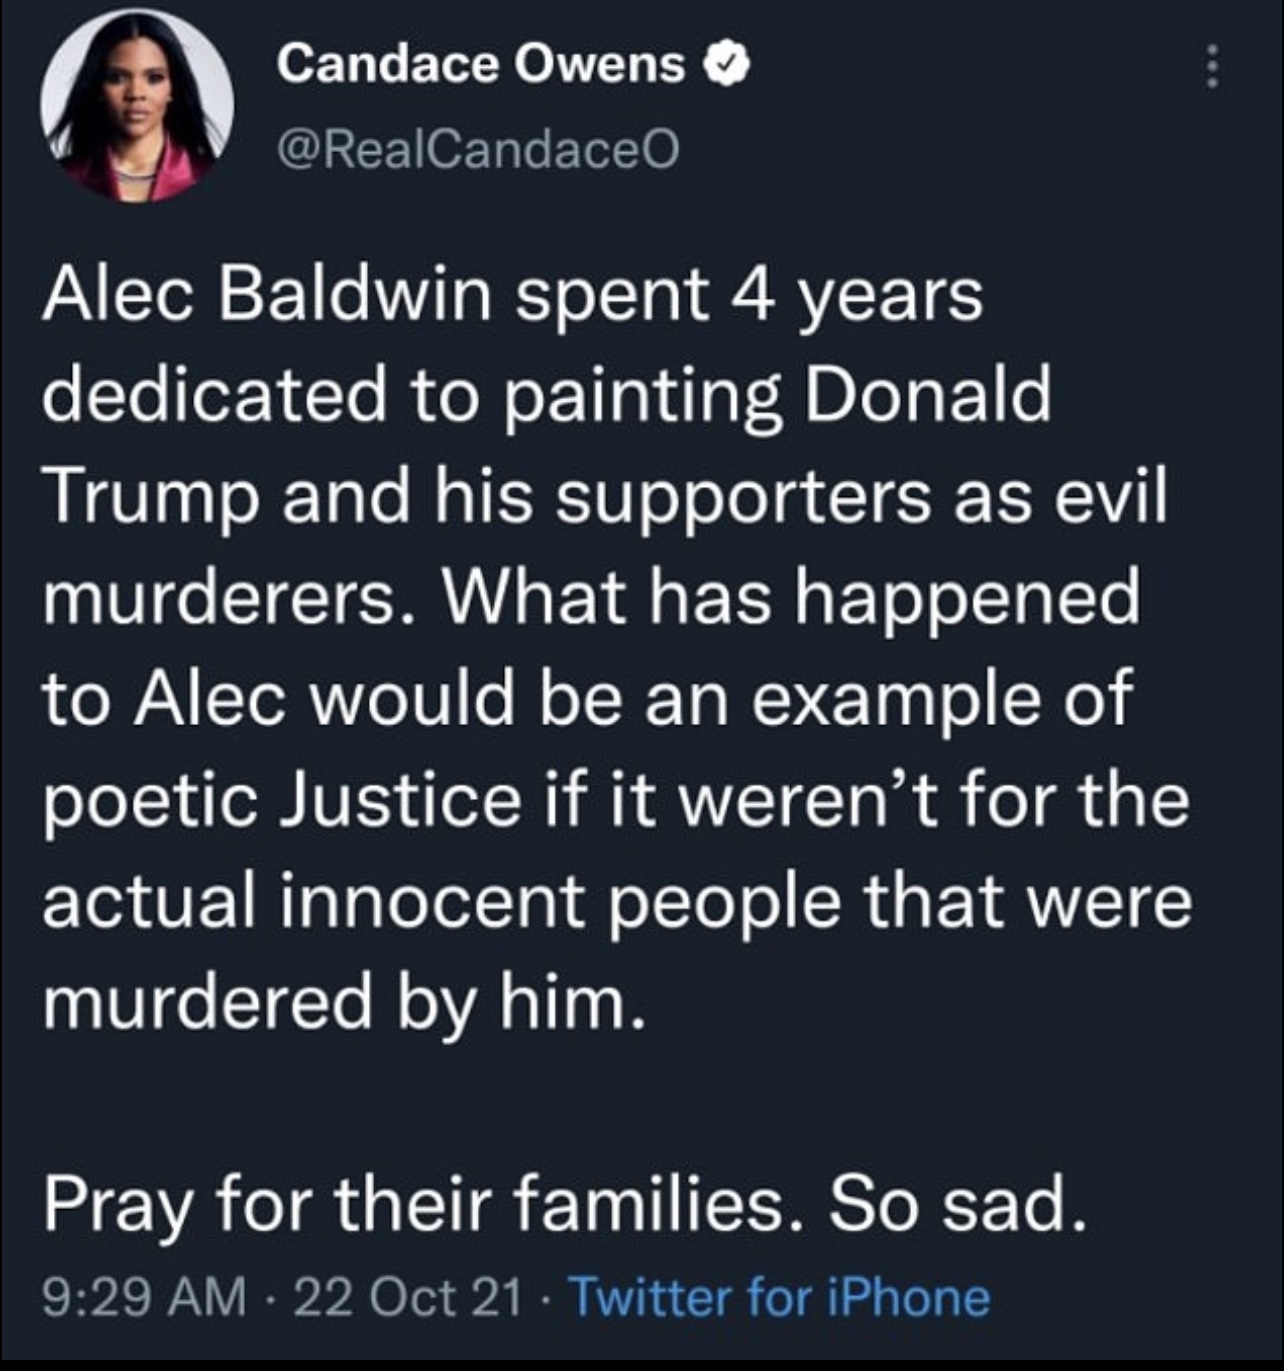 Candace Owens appears to justify Alec Baldwin’s onset accident calling it poetic justice because he doesn’t like Trump